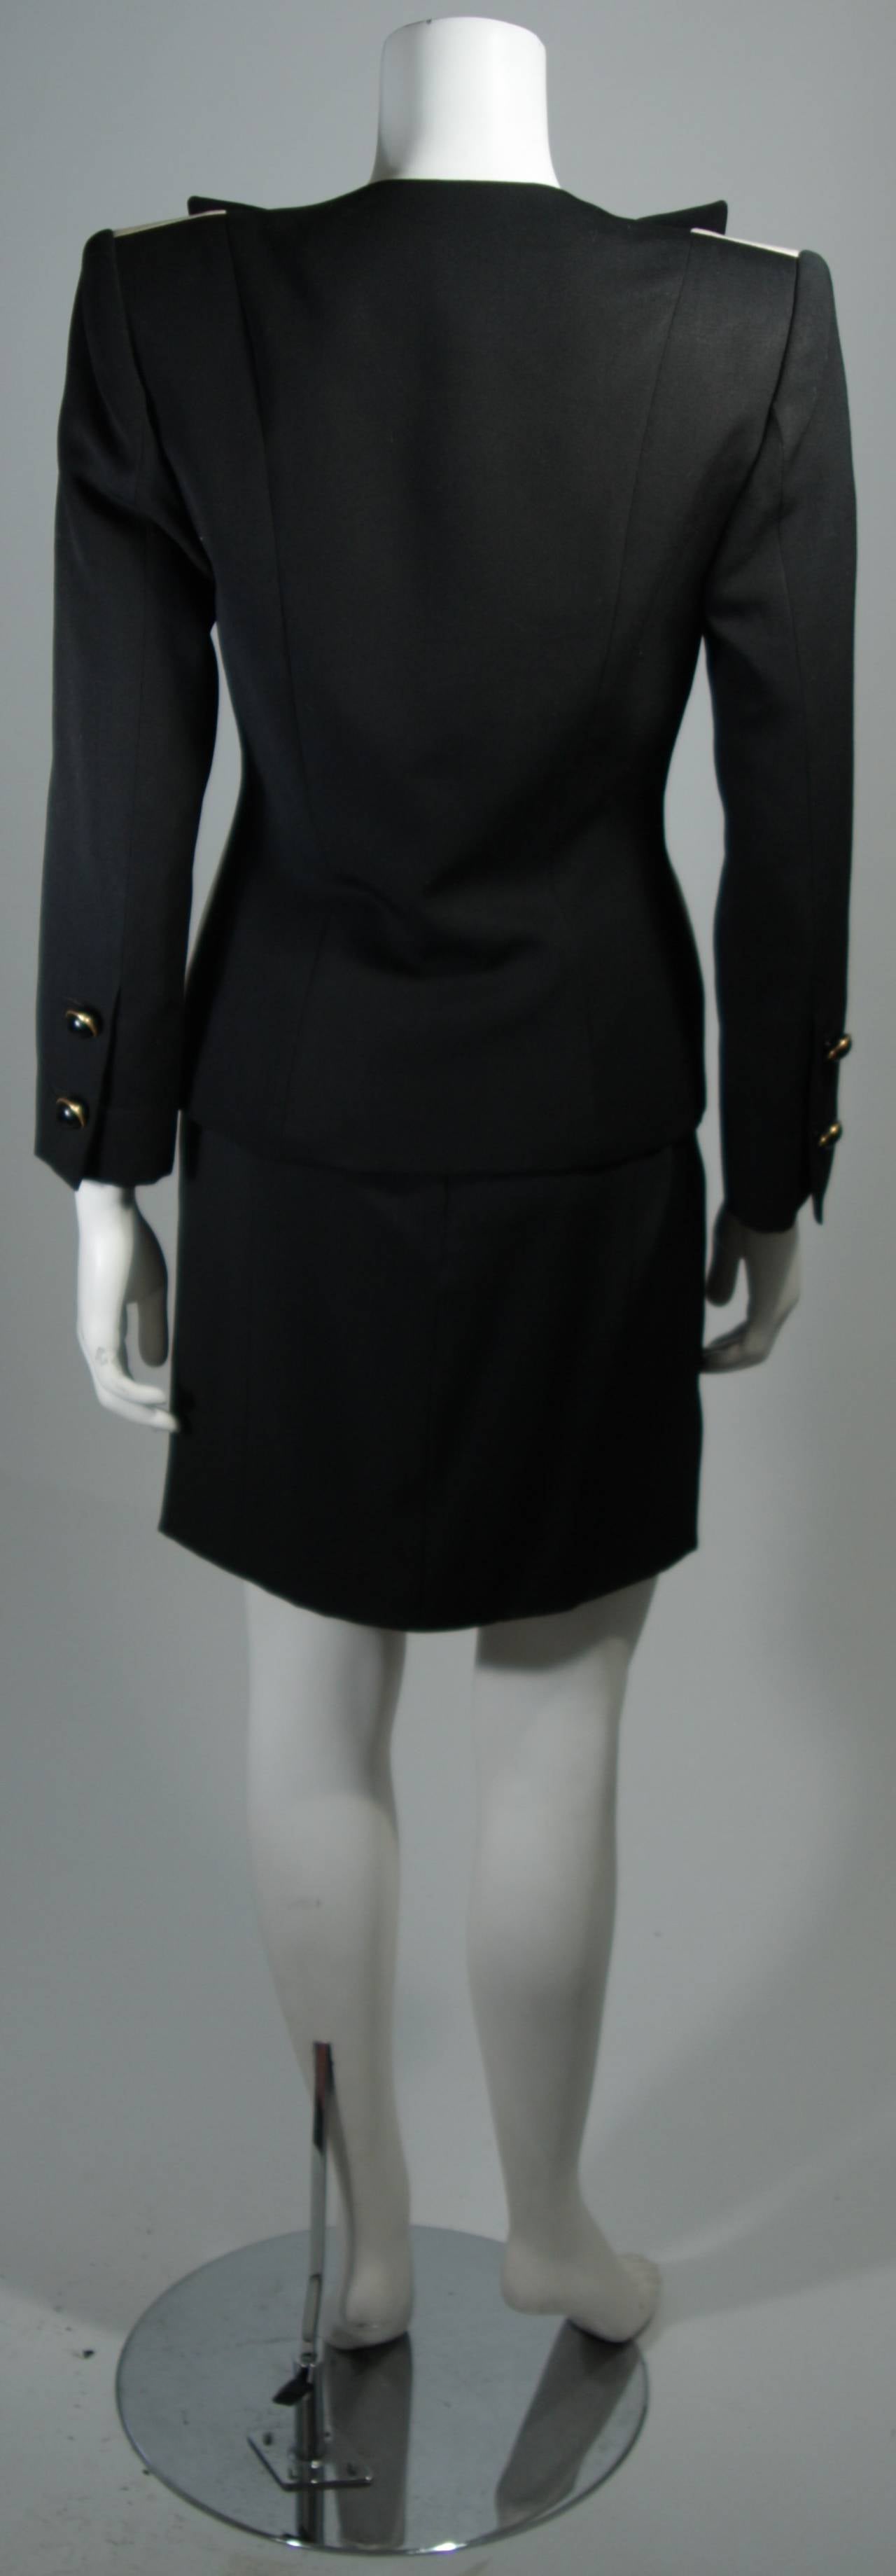 Galanos Couture Black and Off White Contrast Dress Suit Ensemble Size 4 6 3